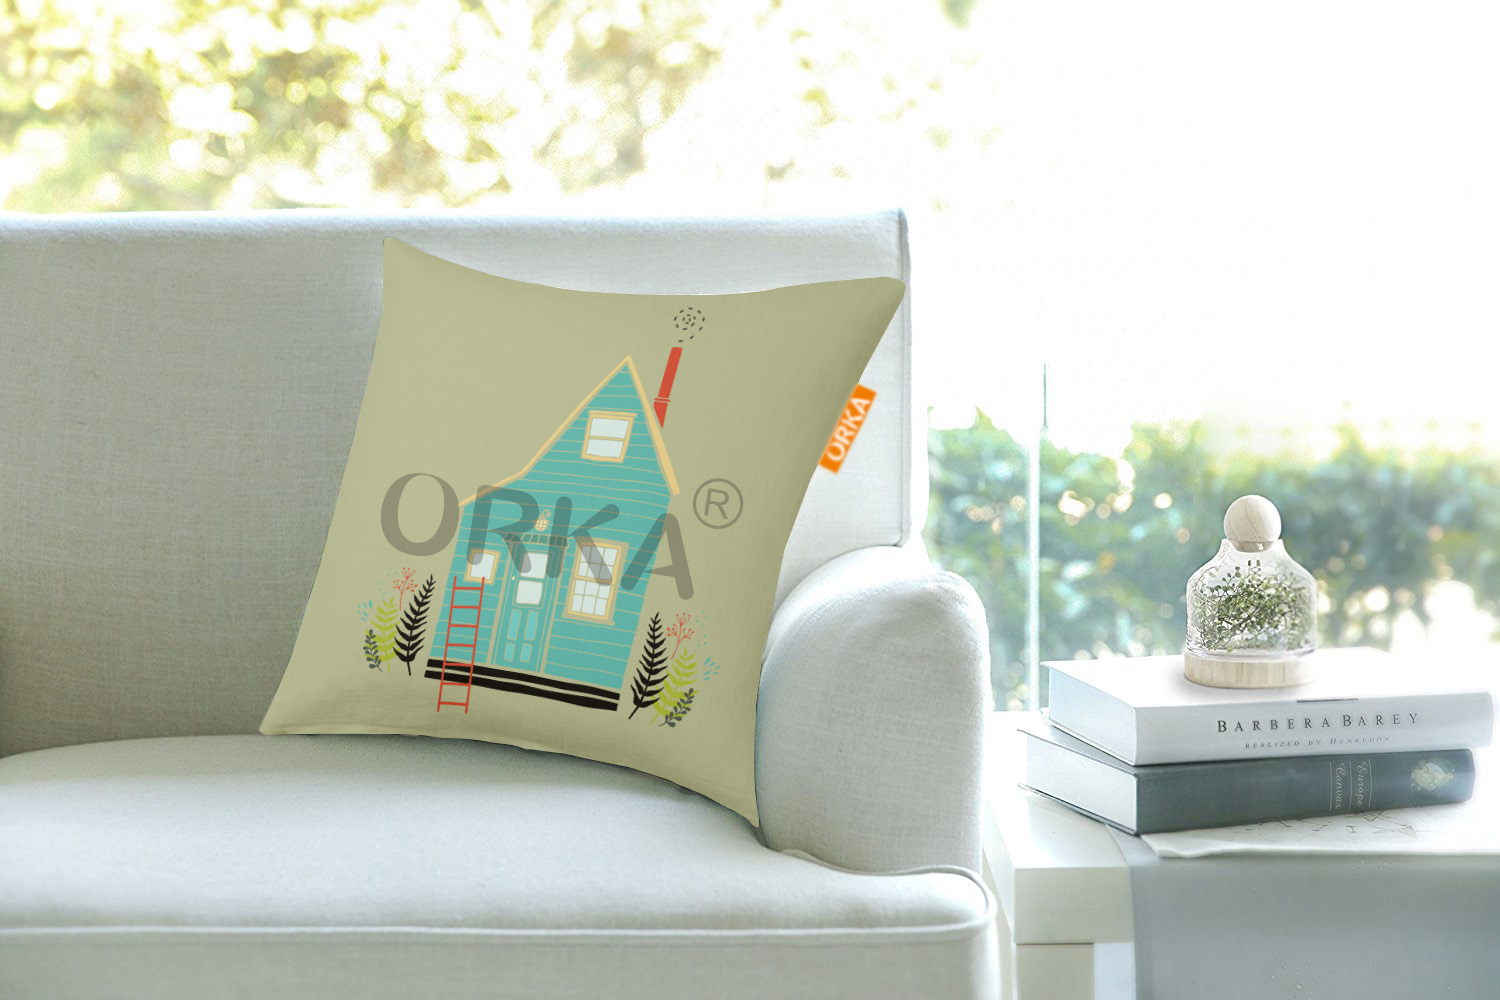 ORKA Home Theme Digital Printed Cushion 14"x14" Cover Only